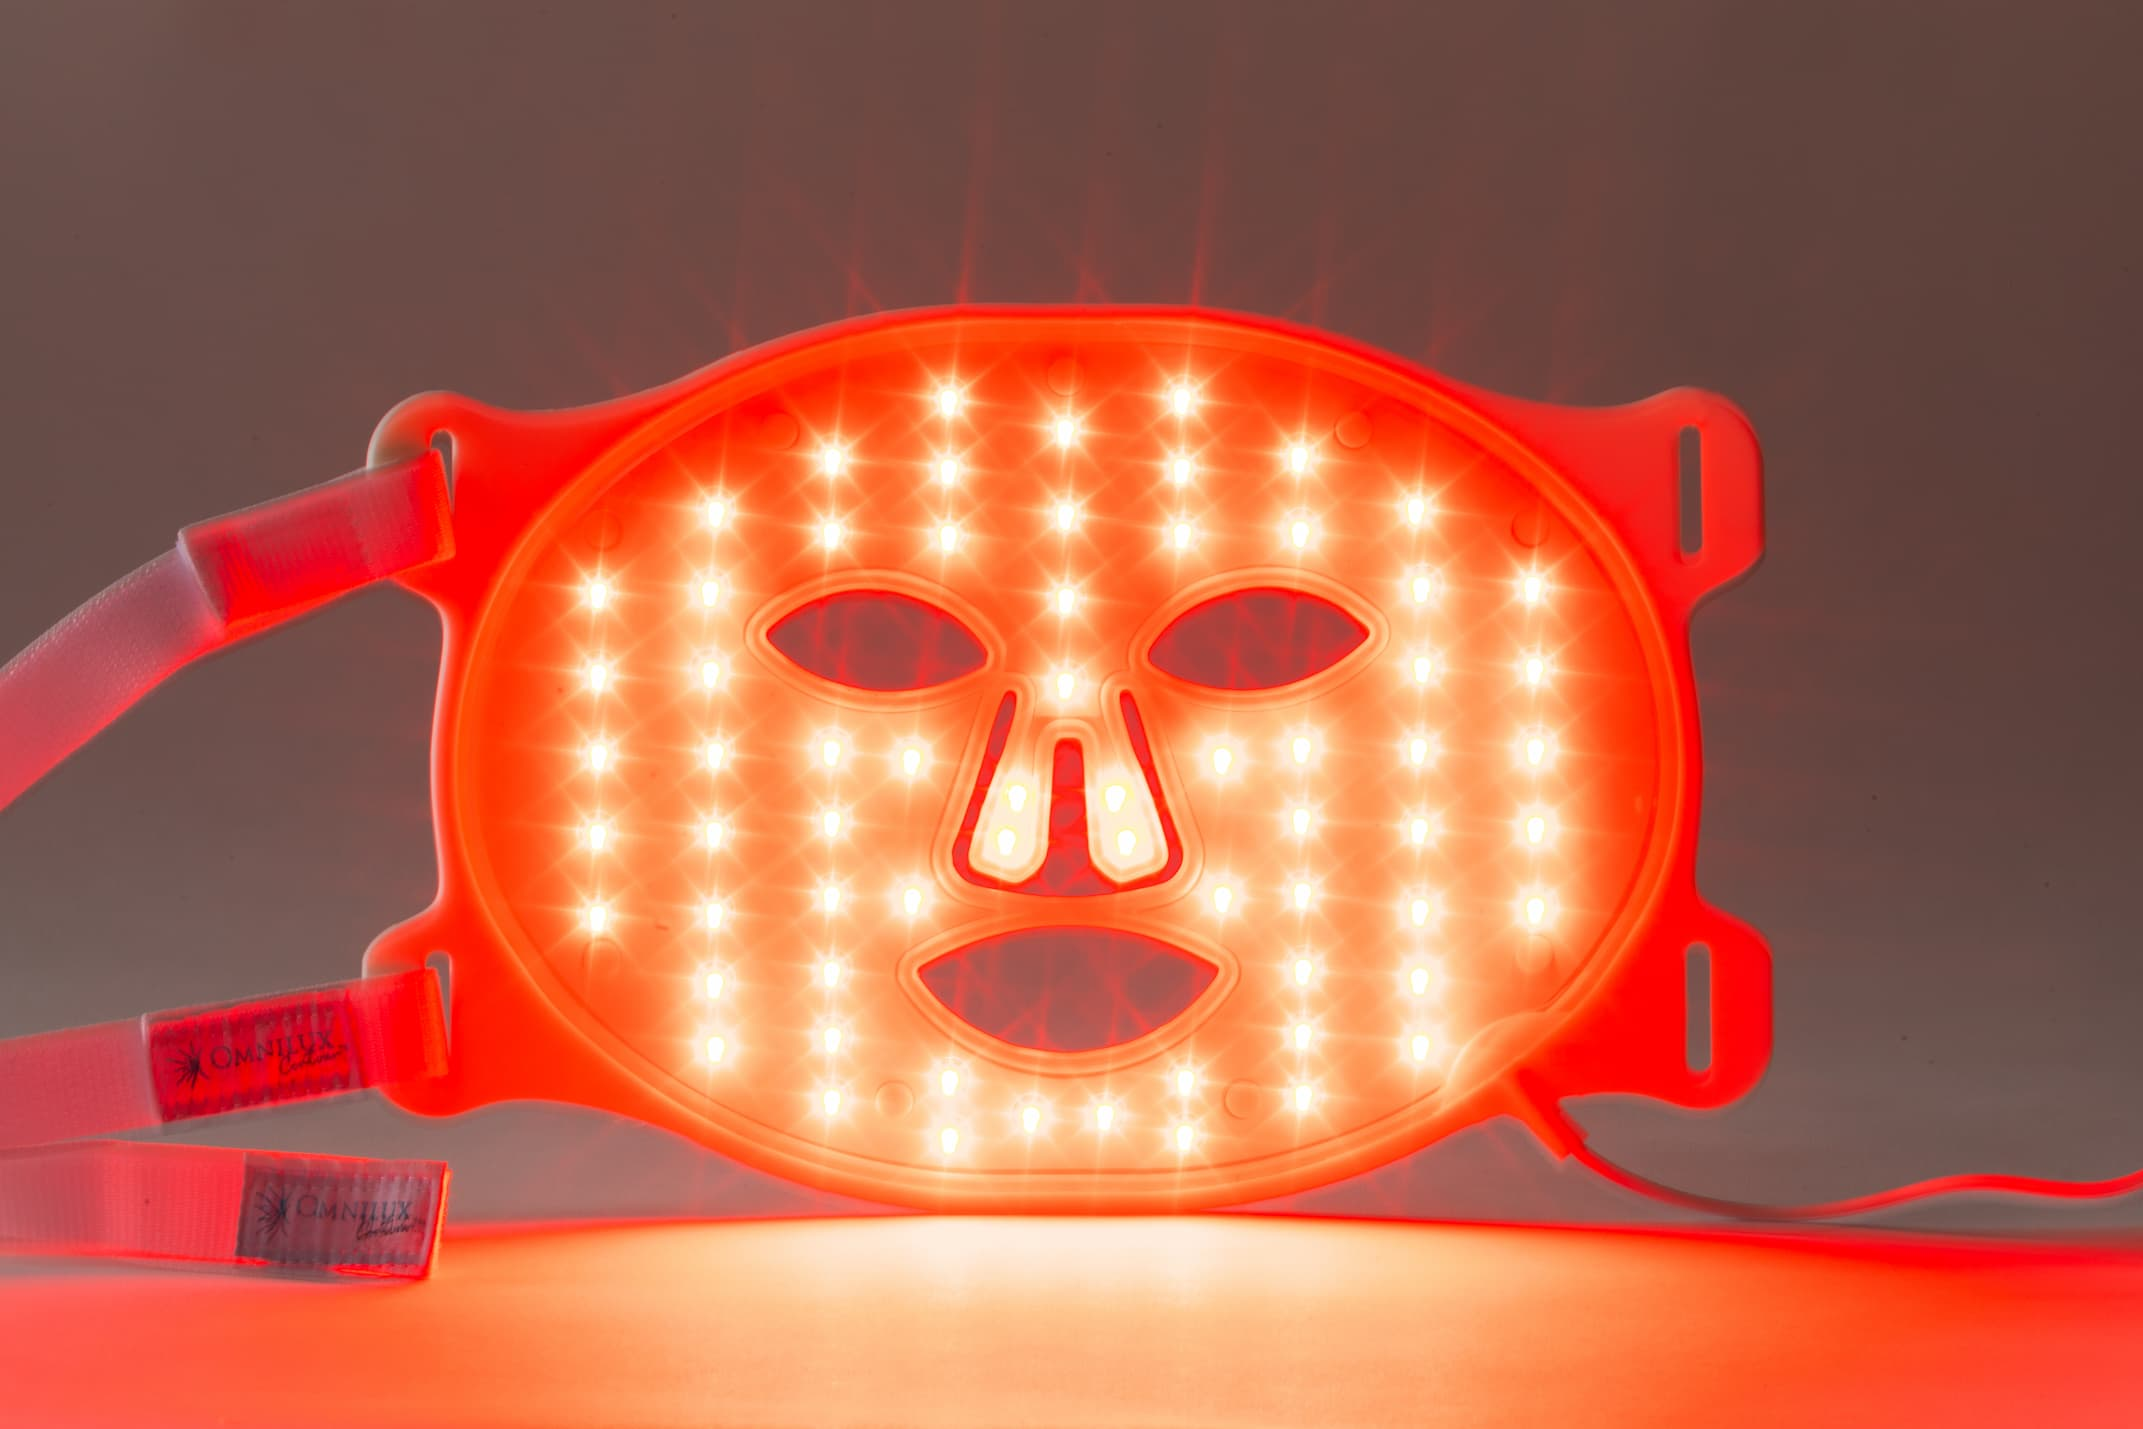 A close-up image of Omnilux LED light panel used for Red and Infrared Light therapy.